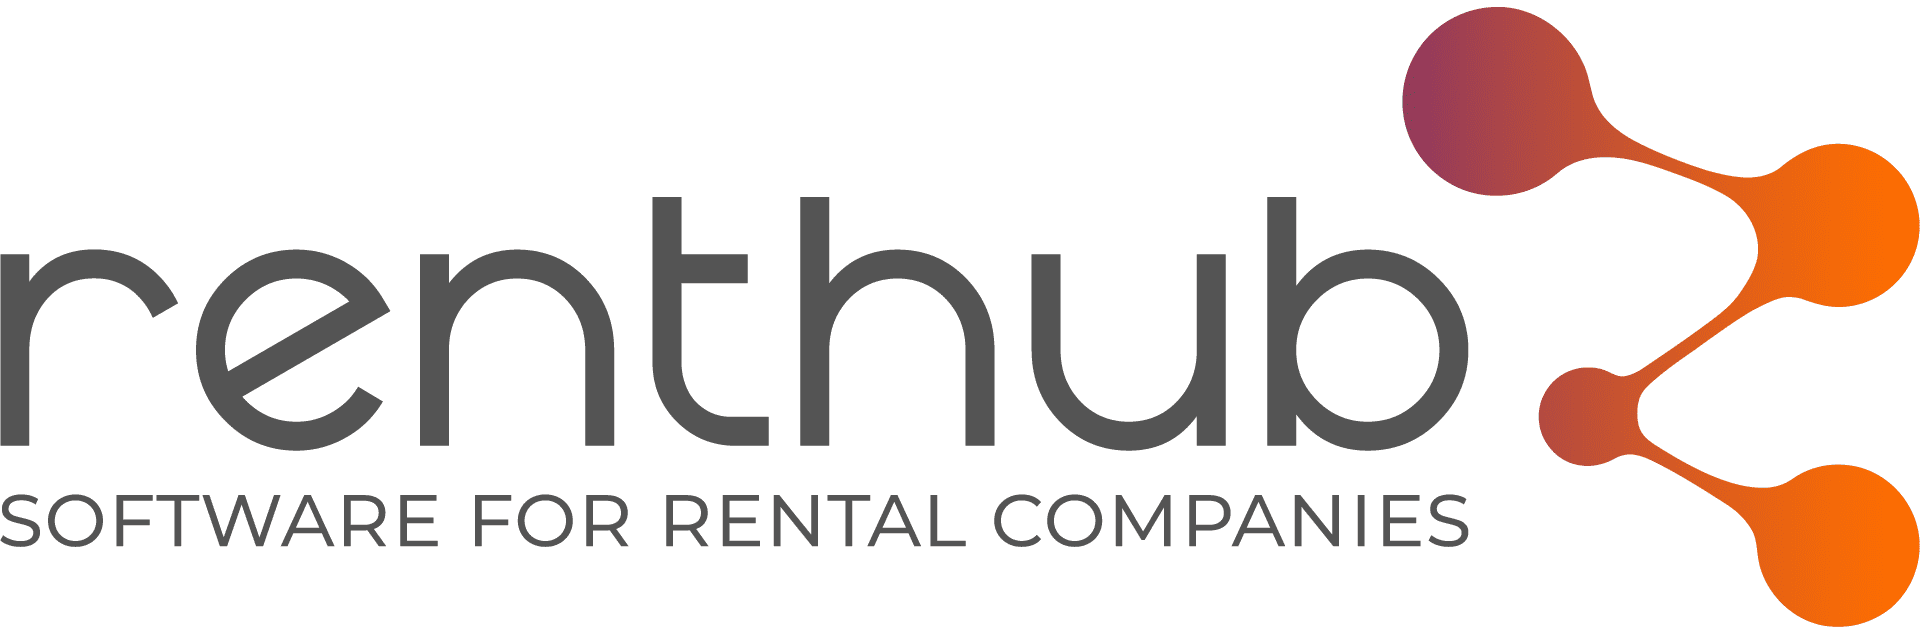 Renthub | Software for rental companies